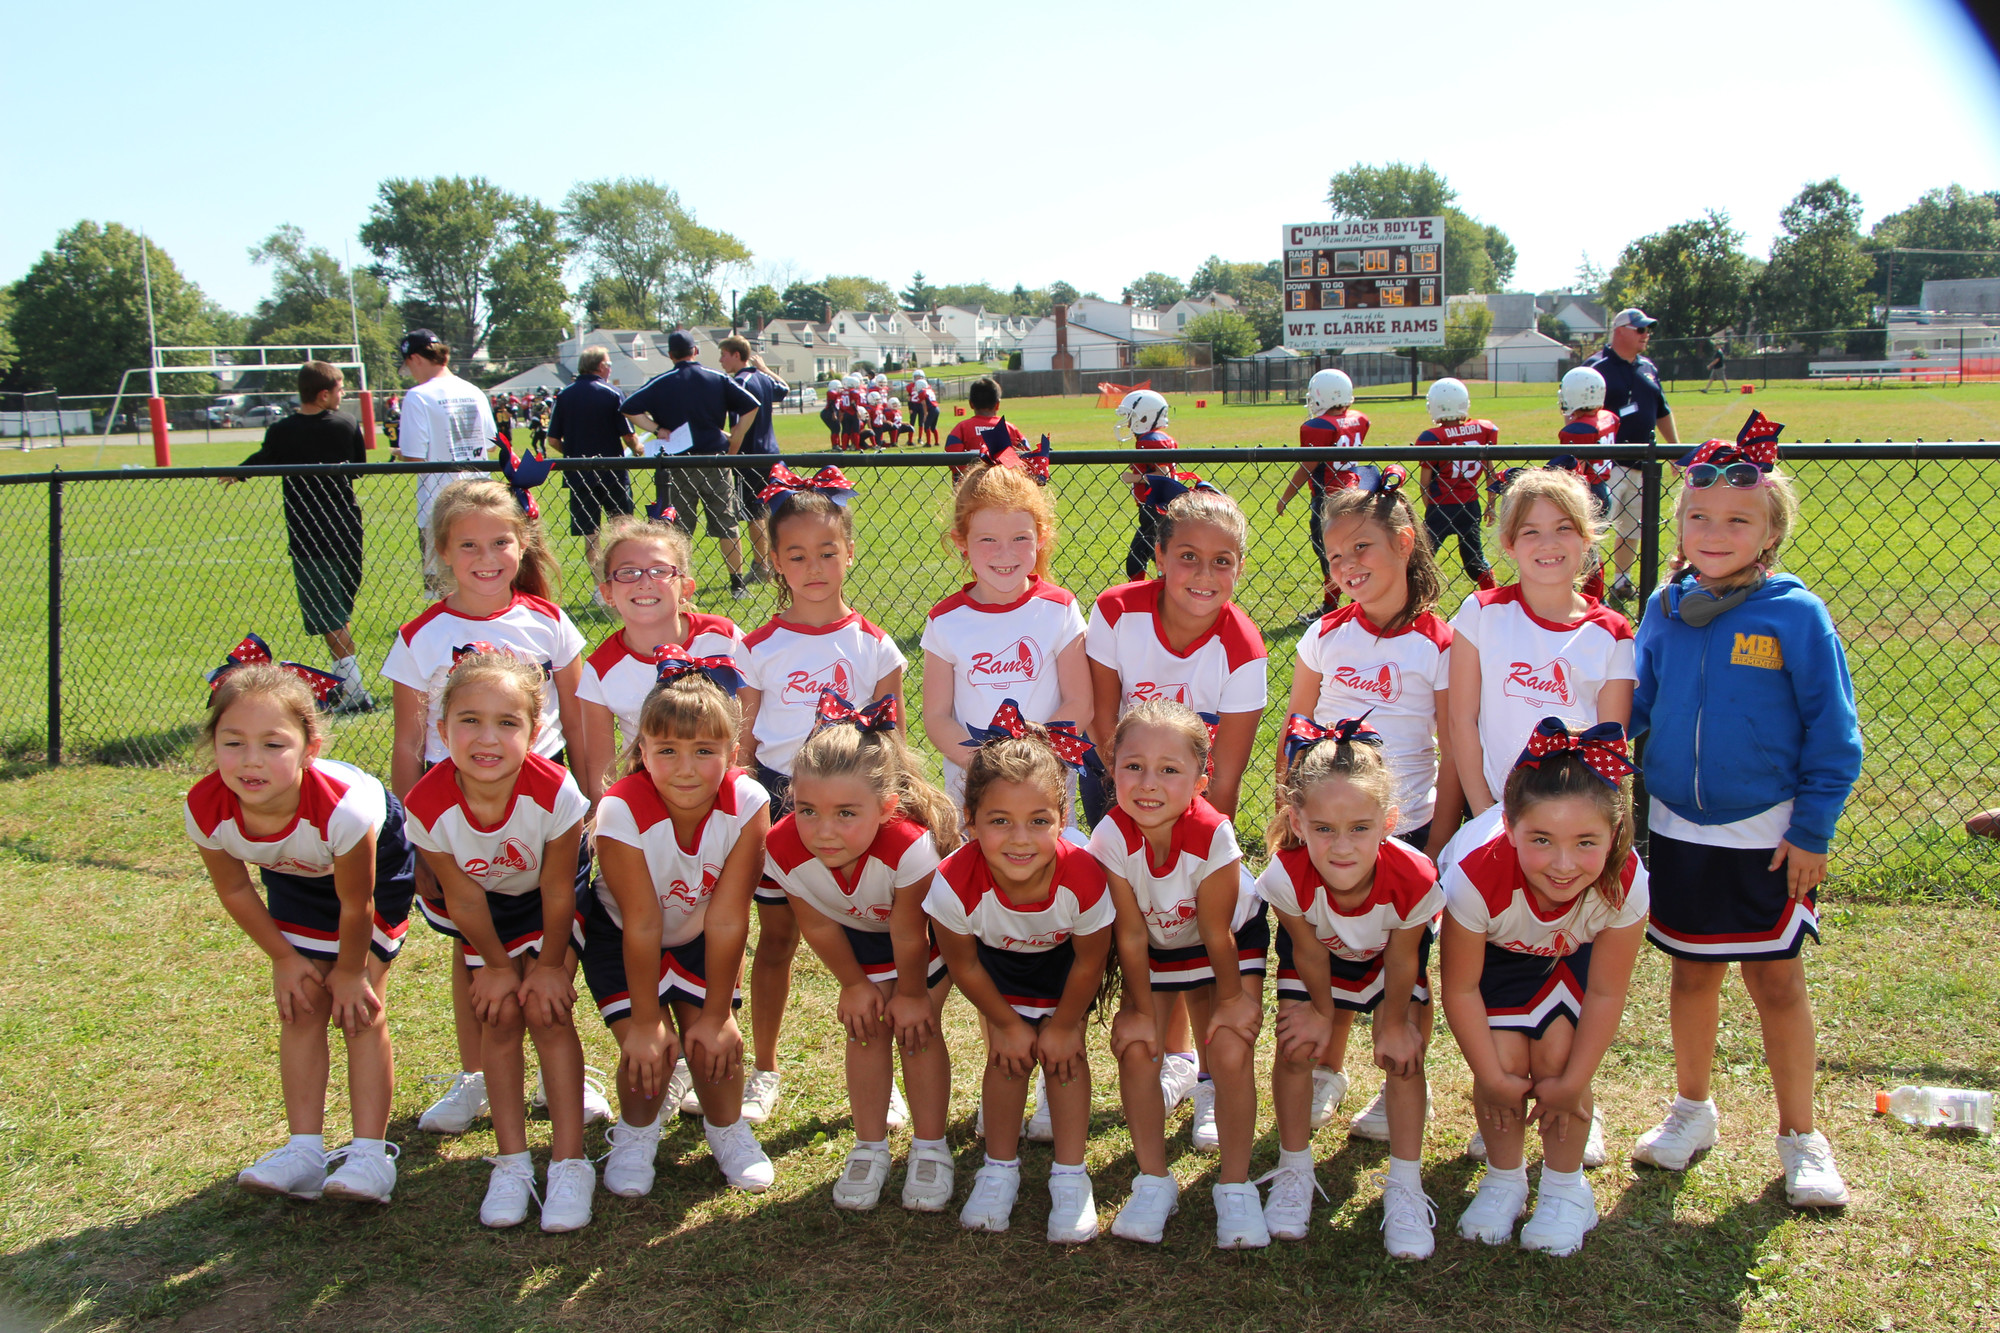 PAL cheerleaders, between the ages of five and nine, cheered on the crowds.